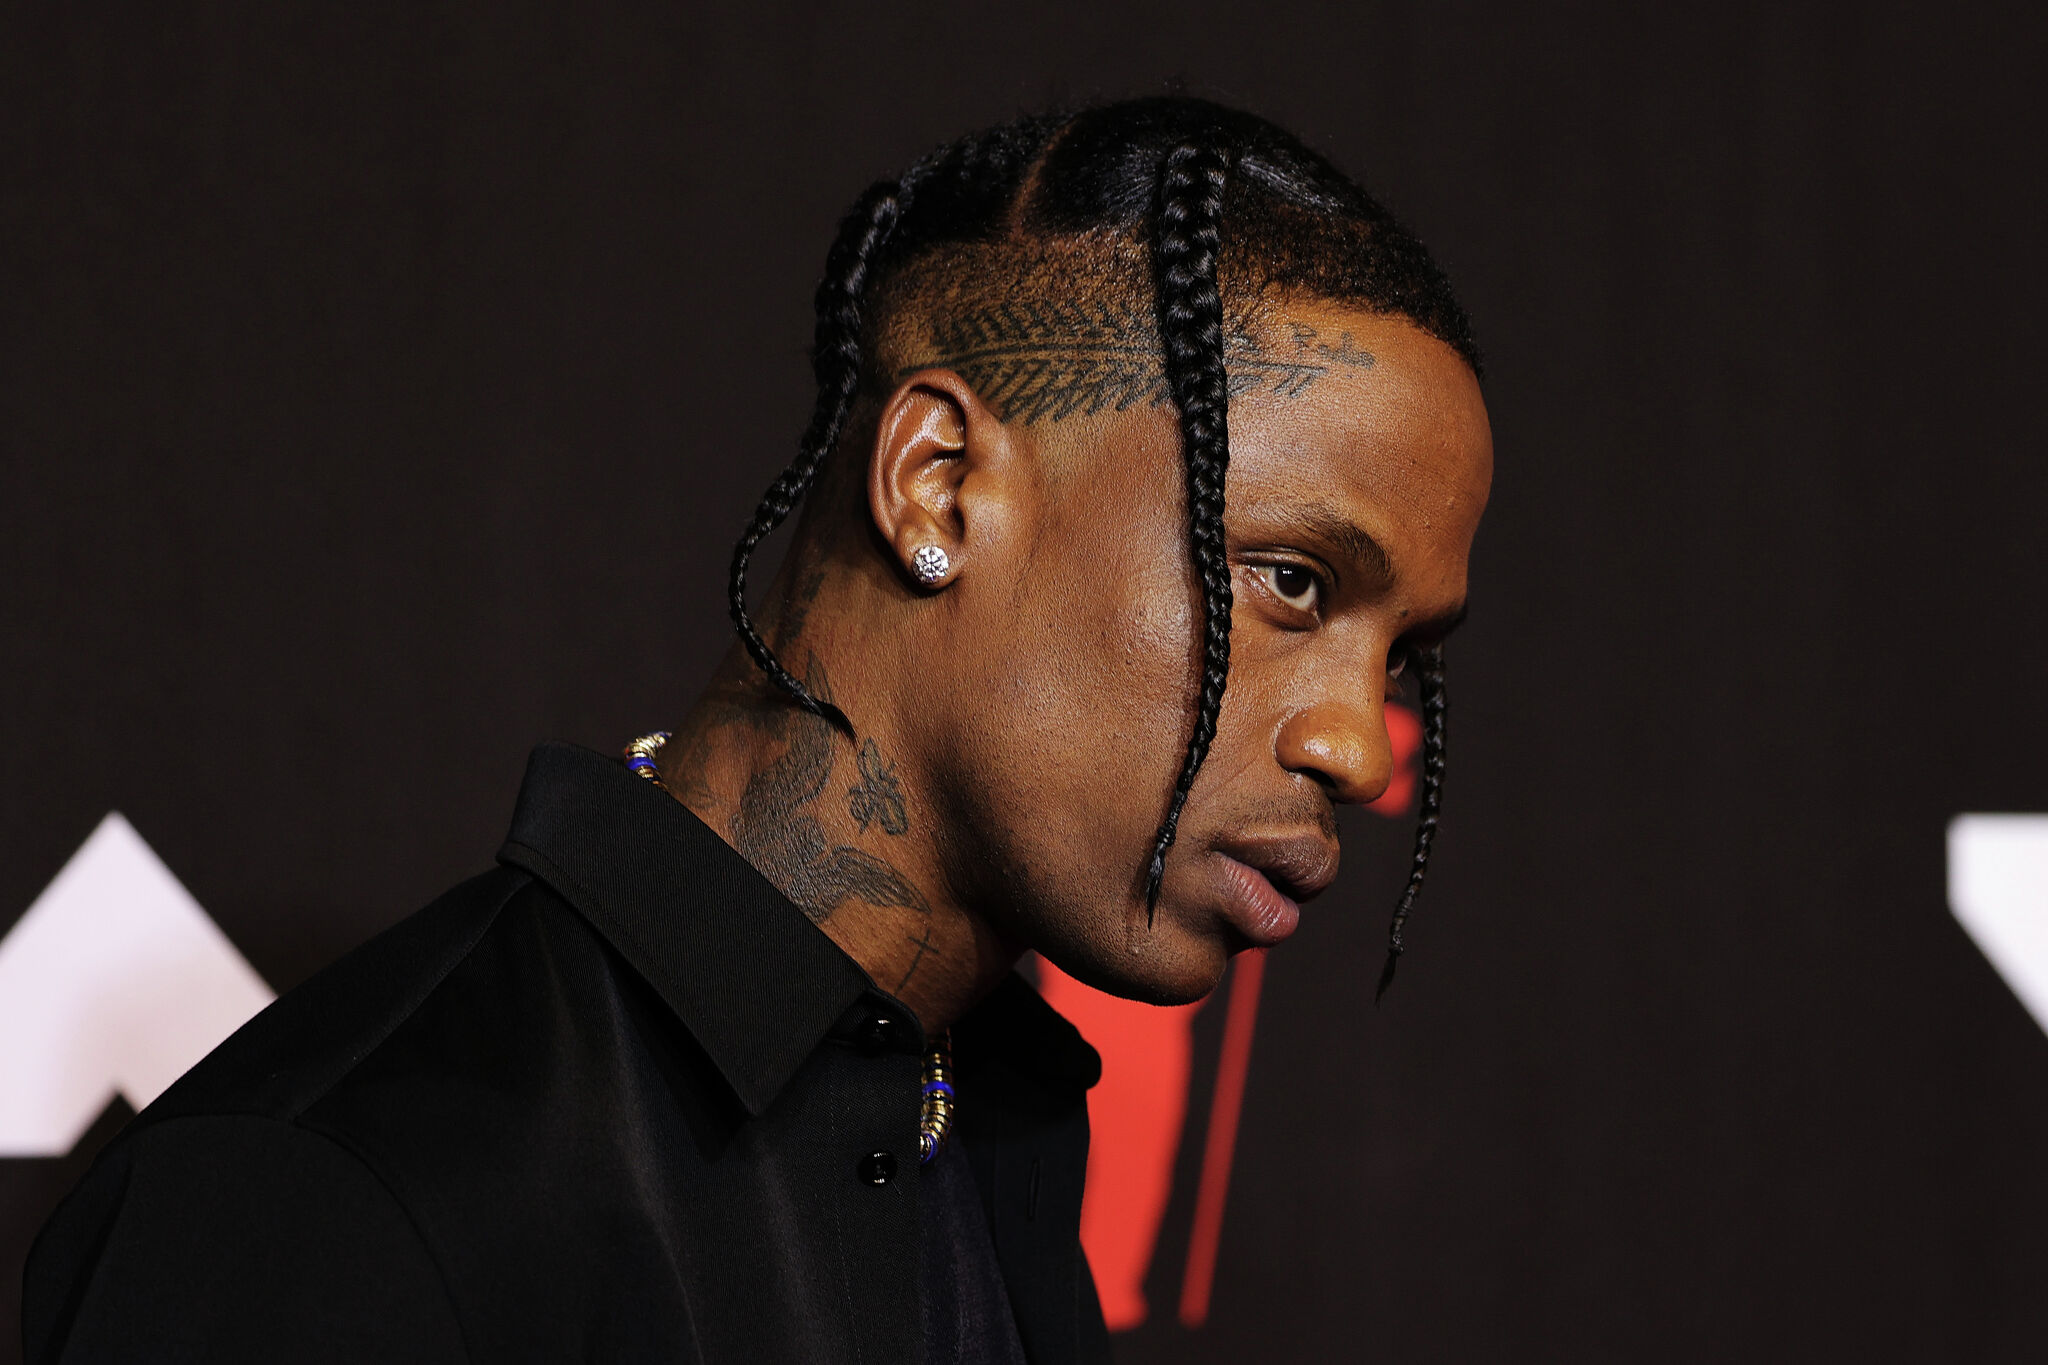 Travis Scott features on first widely released song since Astroworld